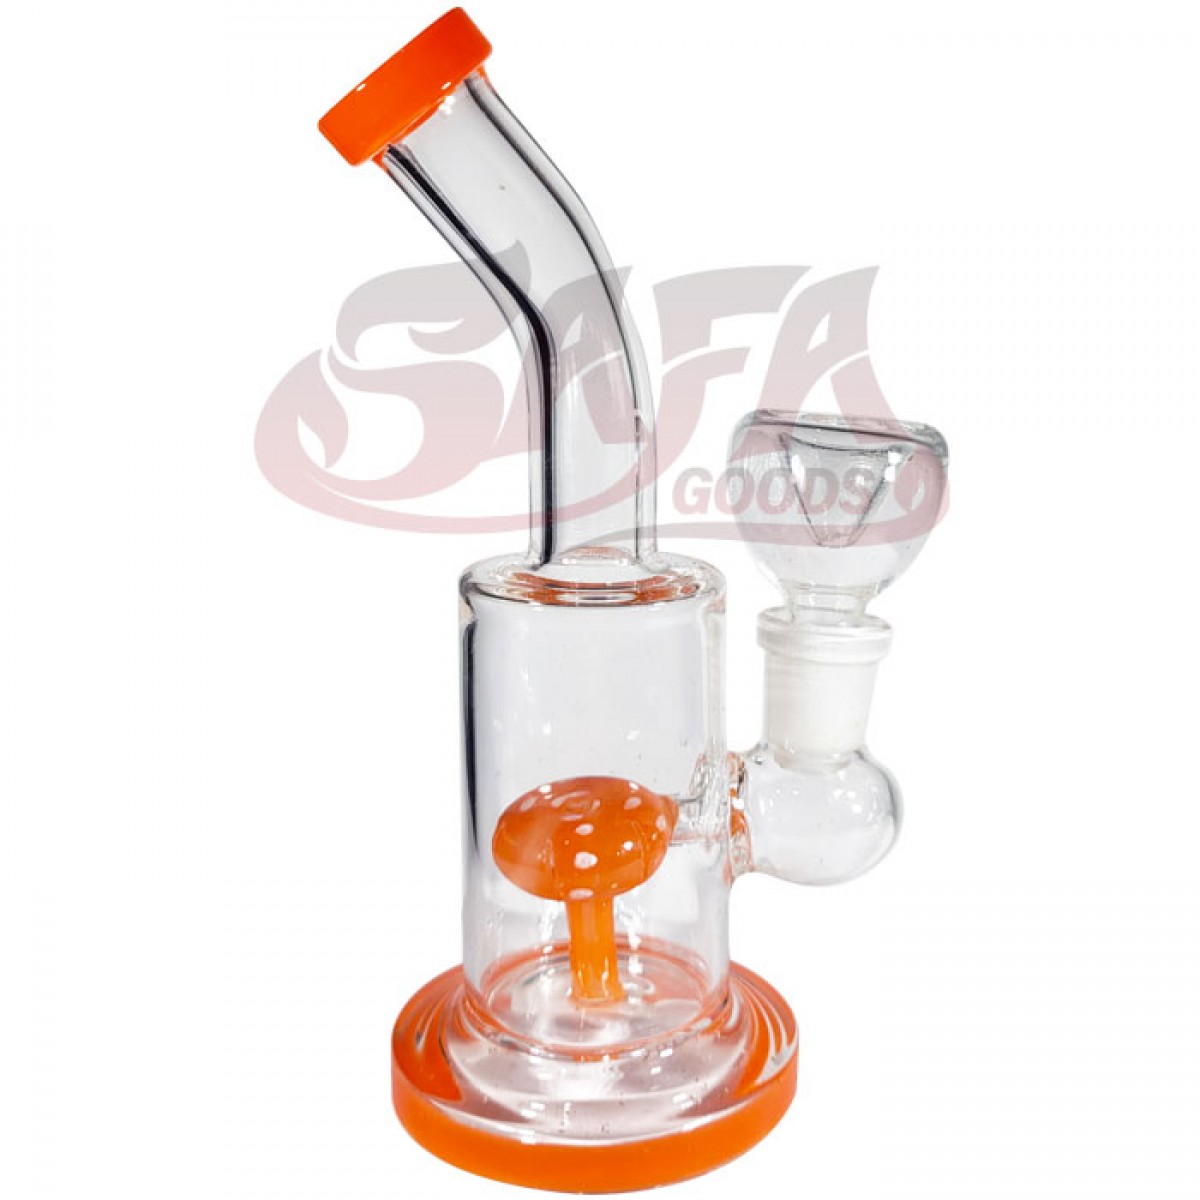 9 Inch Glass Banger Hanger Waterpipe with Showerhead Perc